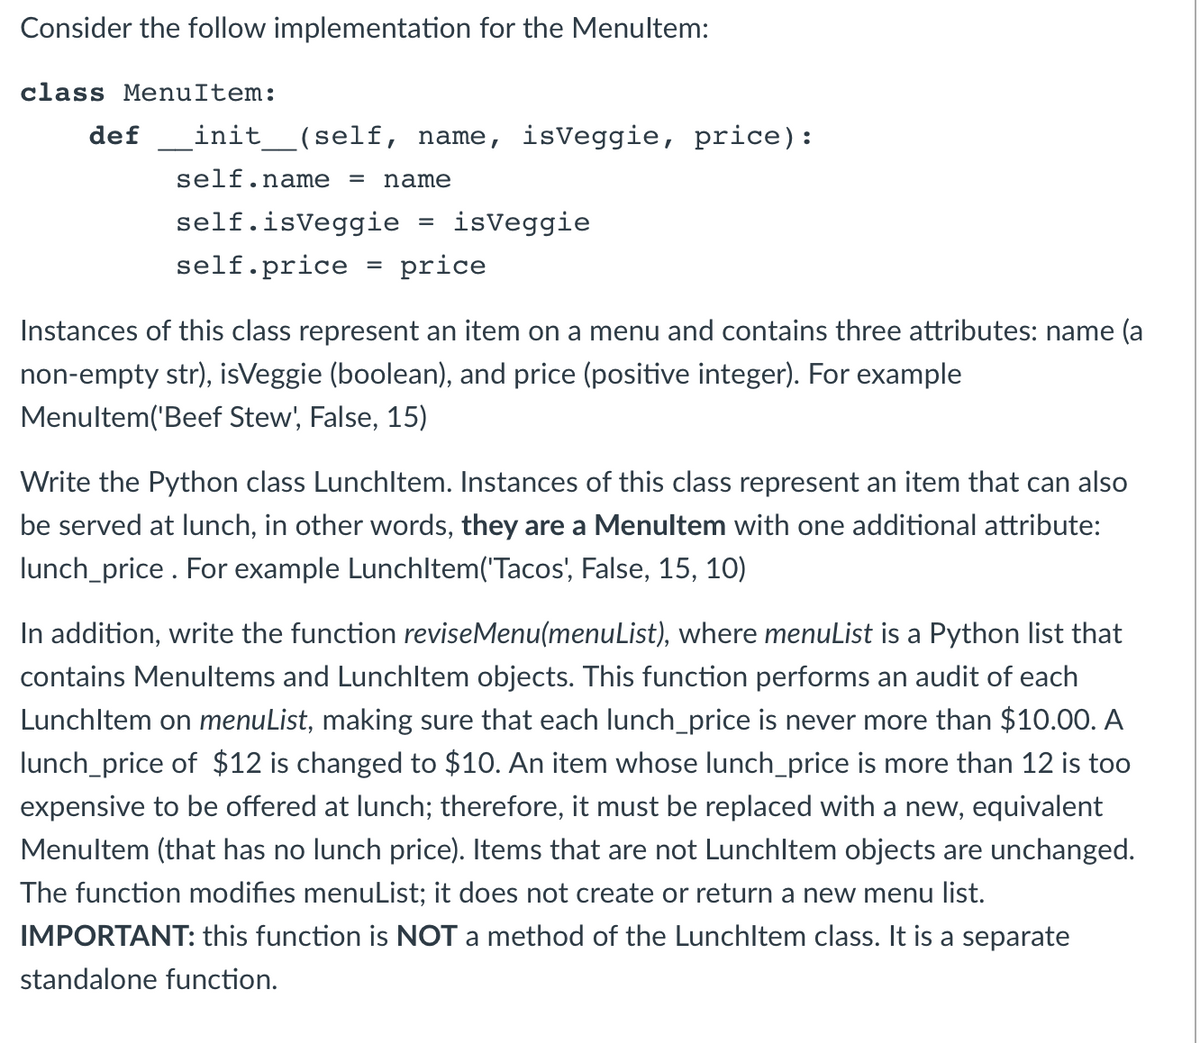 Consider the follow implementation for the Menultem:
class MenuItem:
def
init_(self, name, isVeggie, price):
self.name
name
%3D
self.isVeggie
isVeggie
self.price
price
%3D
Instances of this class represent an item on a menu and contains three attributes: name (a
non-empty str), isVeggie (boolean), and price (positive integer). For example
Menultem('Beef Stew', False, 15)
Write the Python class Lunchltem. Instances of this class represent an item that can also
be served at lunch, in other words, they are a Menultem with one additional attribute:
lunch_price . For example Lunchltem('Tacos', False, 15, 10)
In addition, write the function reviseMenu(menuList), where menuList is a Python list that
contains Menultems and Lunchltem objects. This function performs an audit of each
Lunchltem on menuList, making sure that each lunch_price is never more than $10.00. A
lunch_price of $12 is changed to $10. An item whose lunch_price is more than 12 is too
expensive to be offered at lunch; therefore, it must be replaced with a new, equivalent
Menultem (that has no lunch price). Items that are not Lunchltem objects are unchanged.
The function modifies menuList; it does not create or return a new menu list.
IMPORTANT: this function is NOT a method of the Lunchltem class. It is a separate
standalone function.
